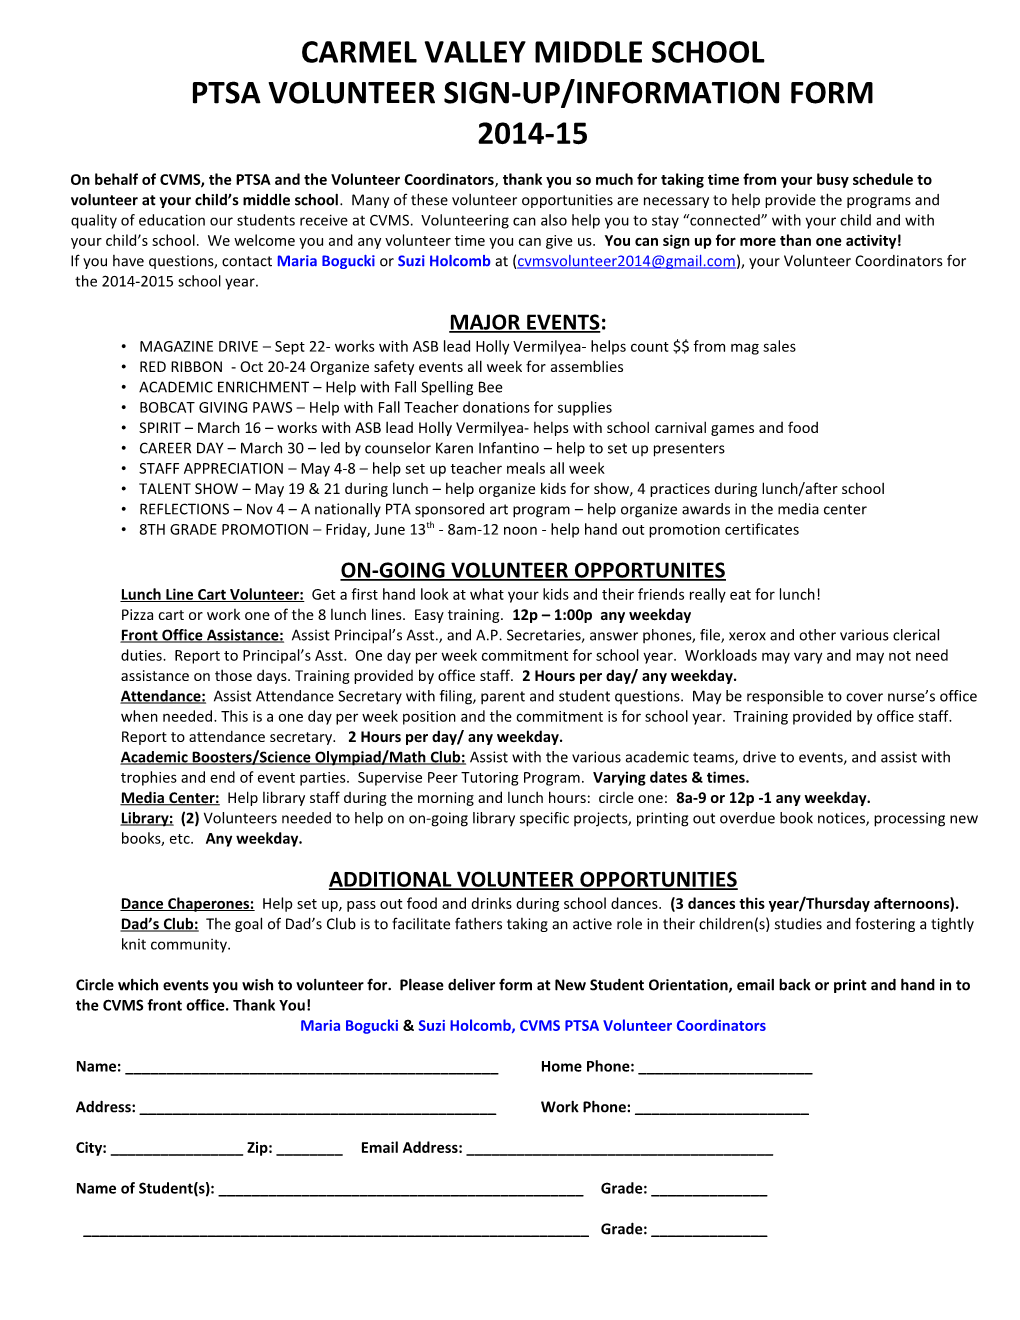 Carmel Valley Middle School Volunteer Information and Sign up Sheet